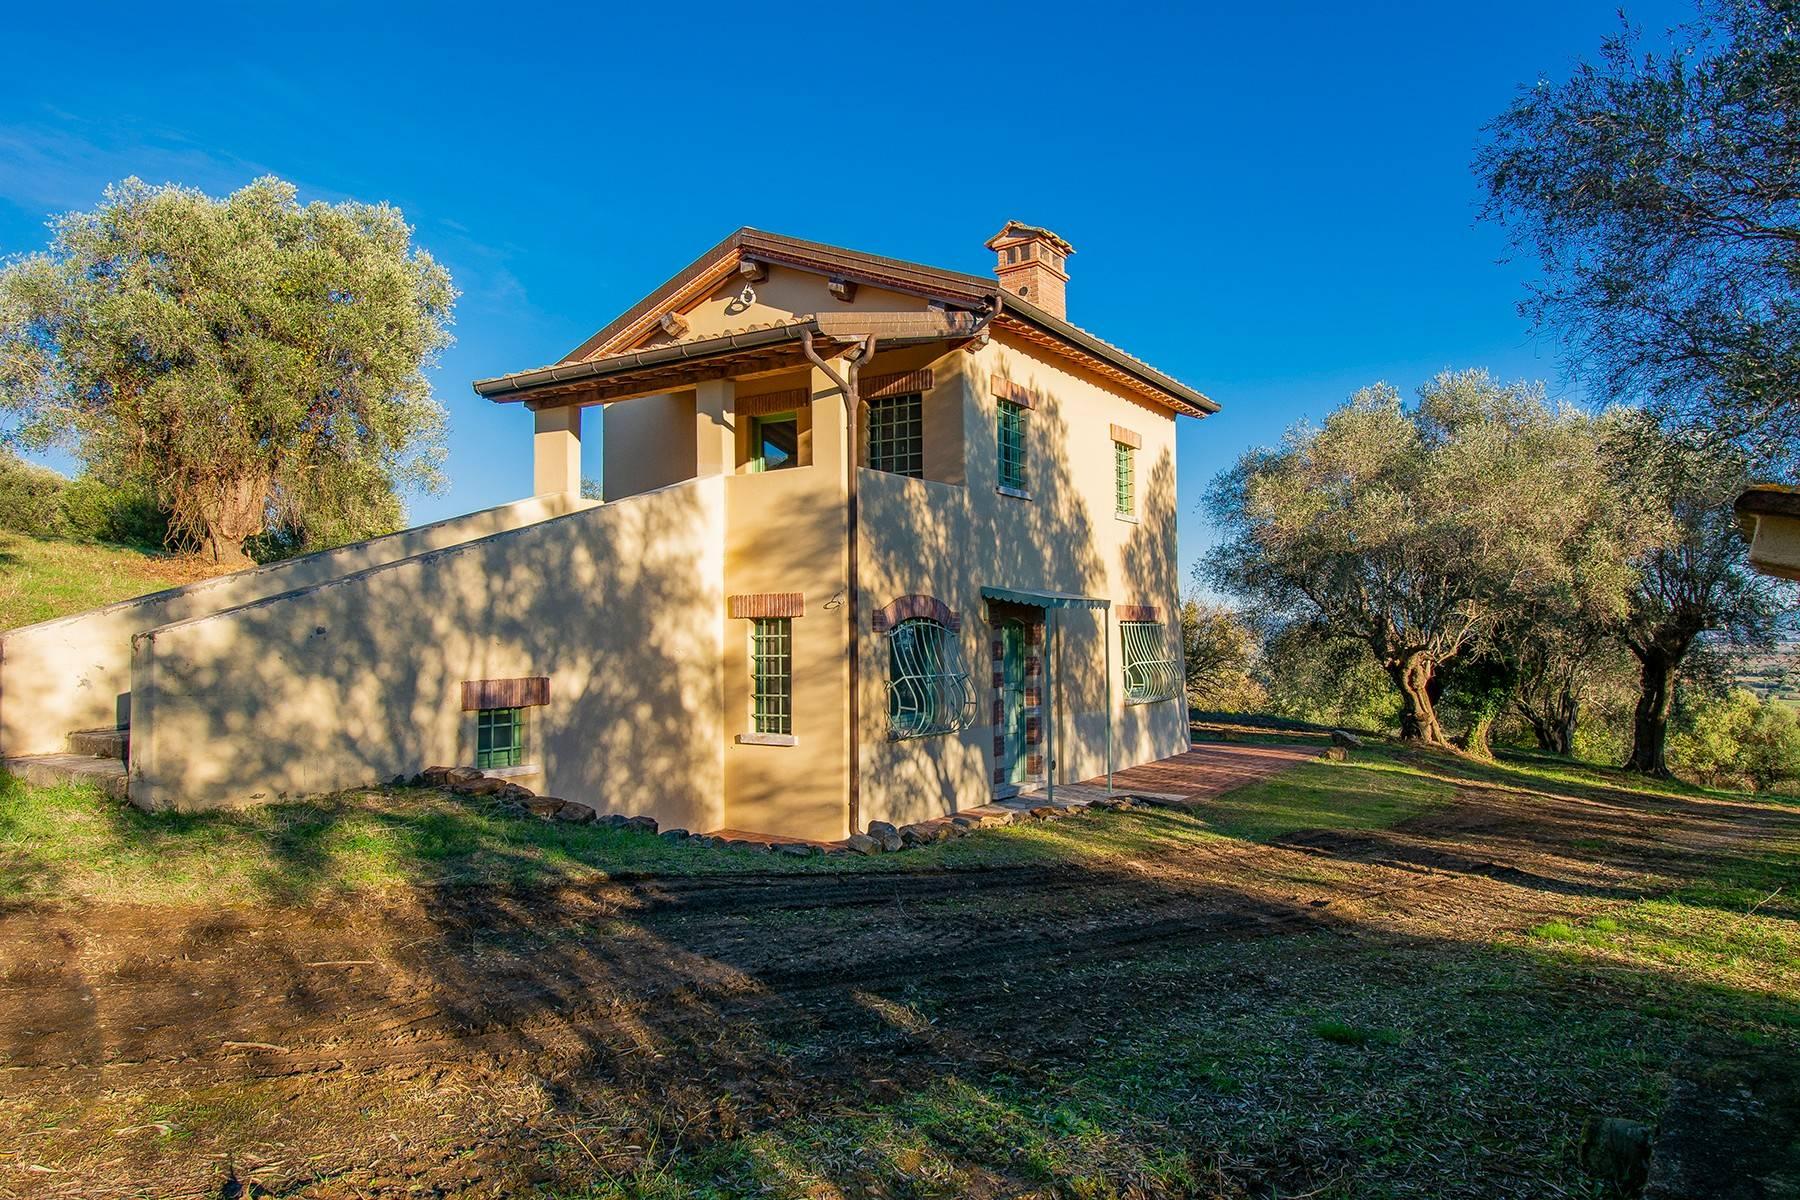 Newly-built farmhouse nestled in the olive groves - 7